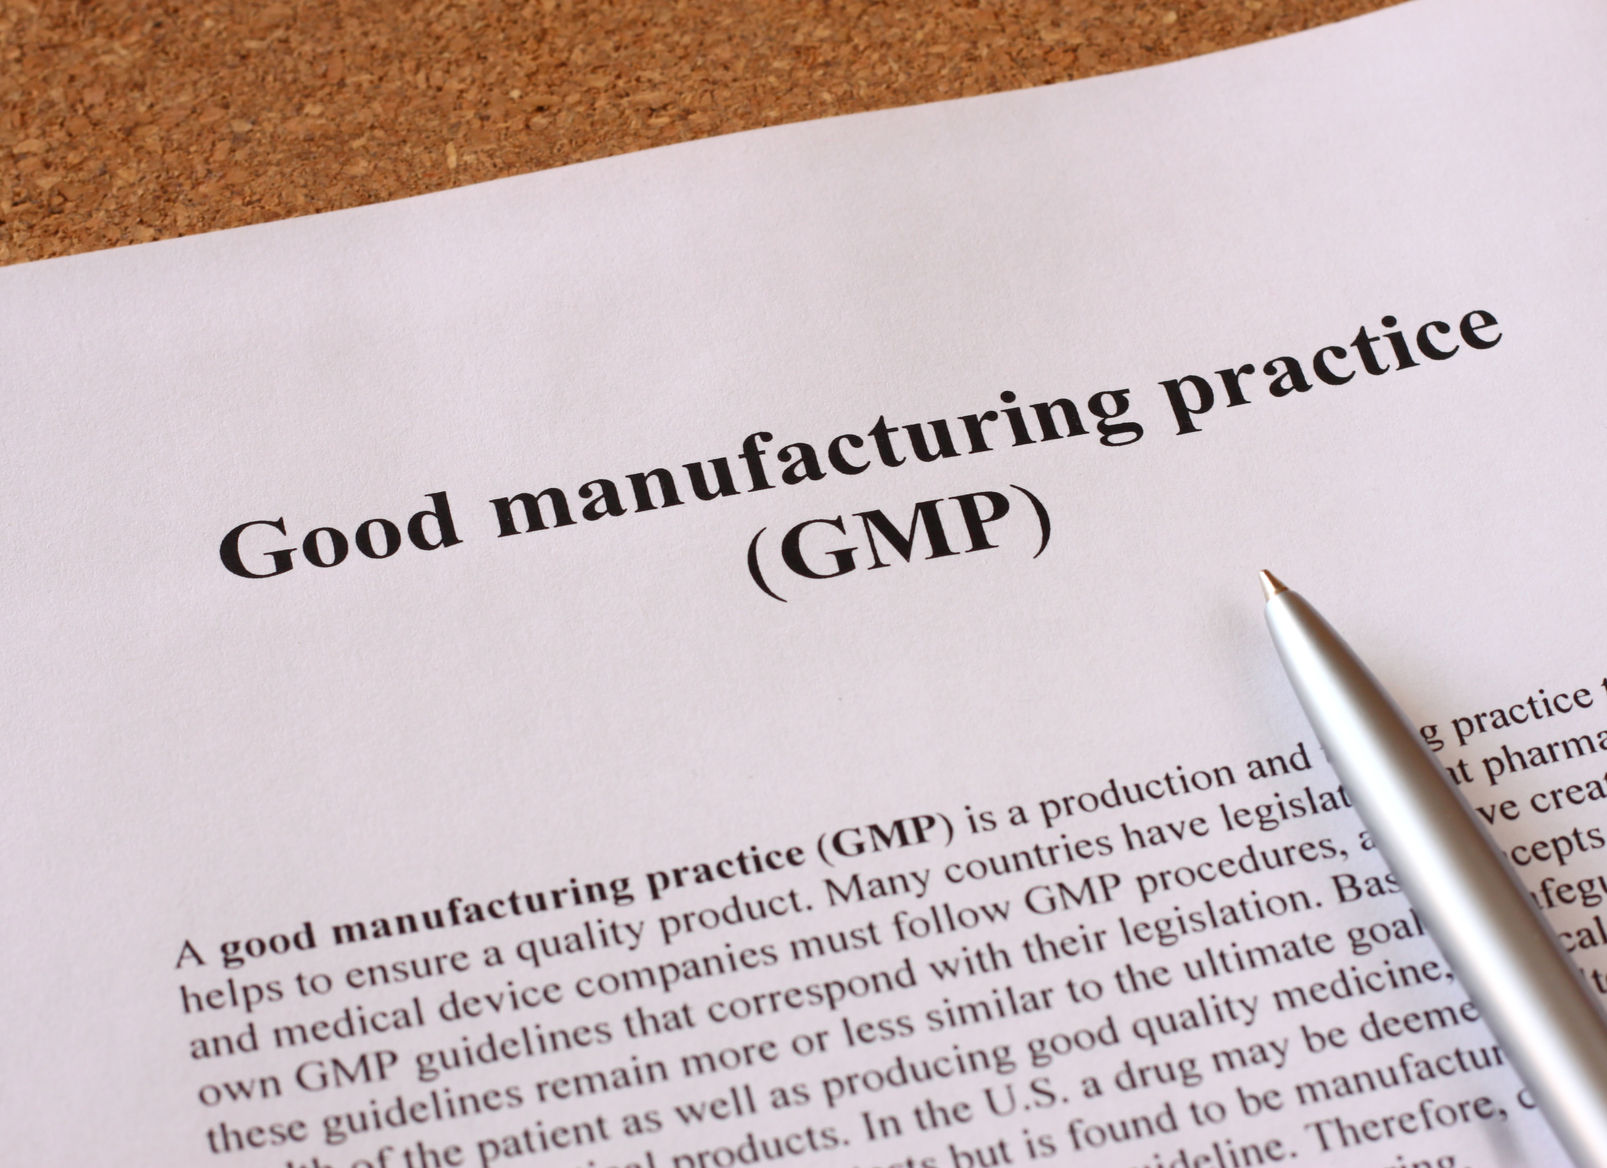 Good manufacturing practice (GMP)